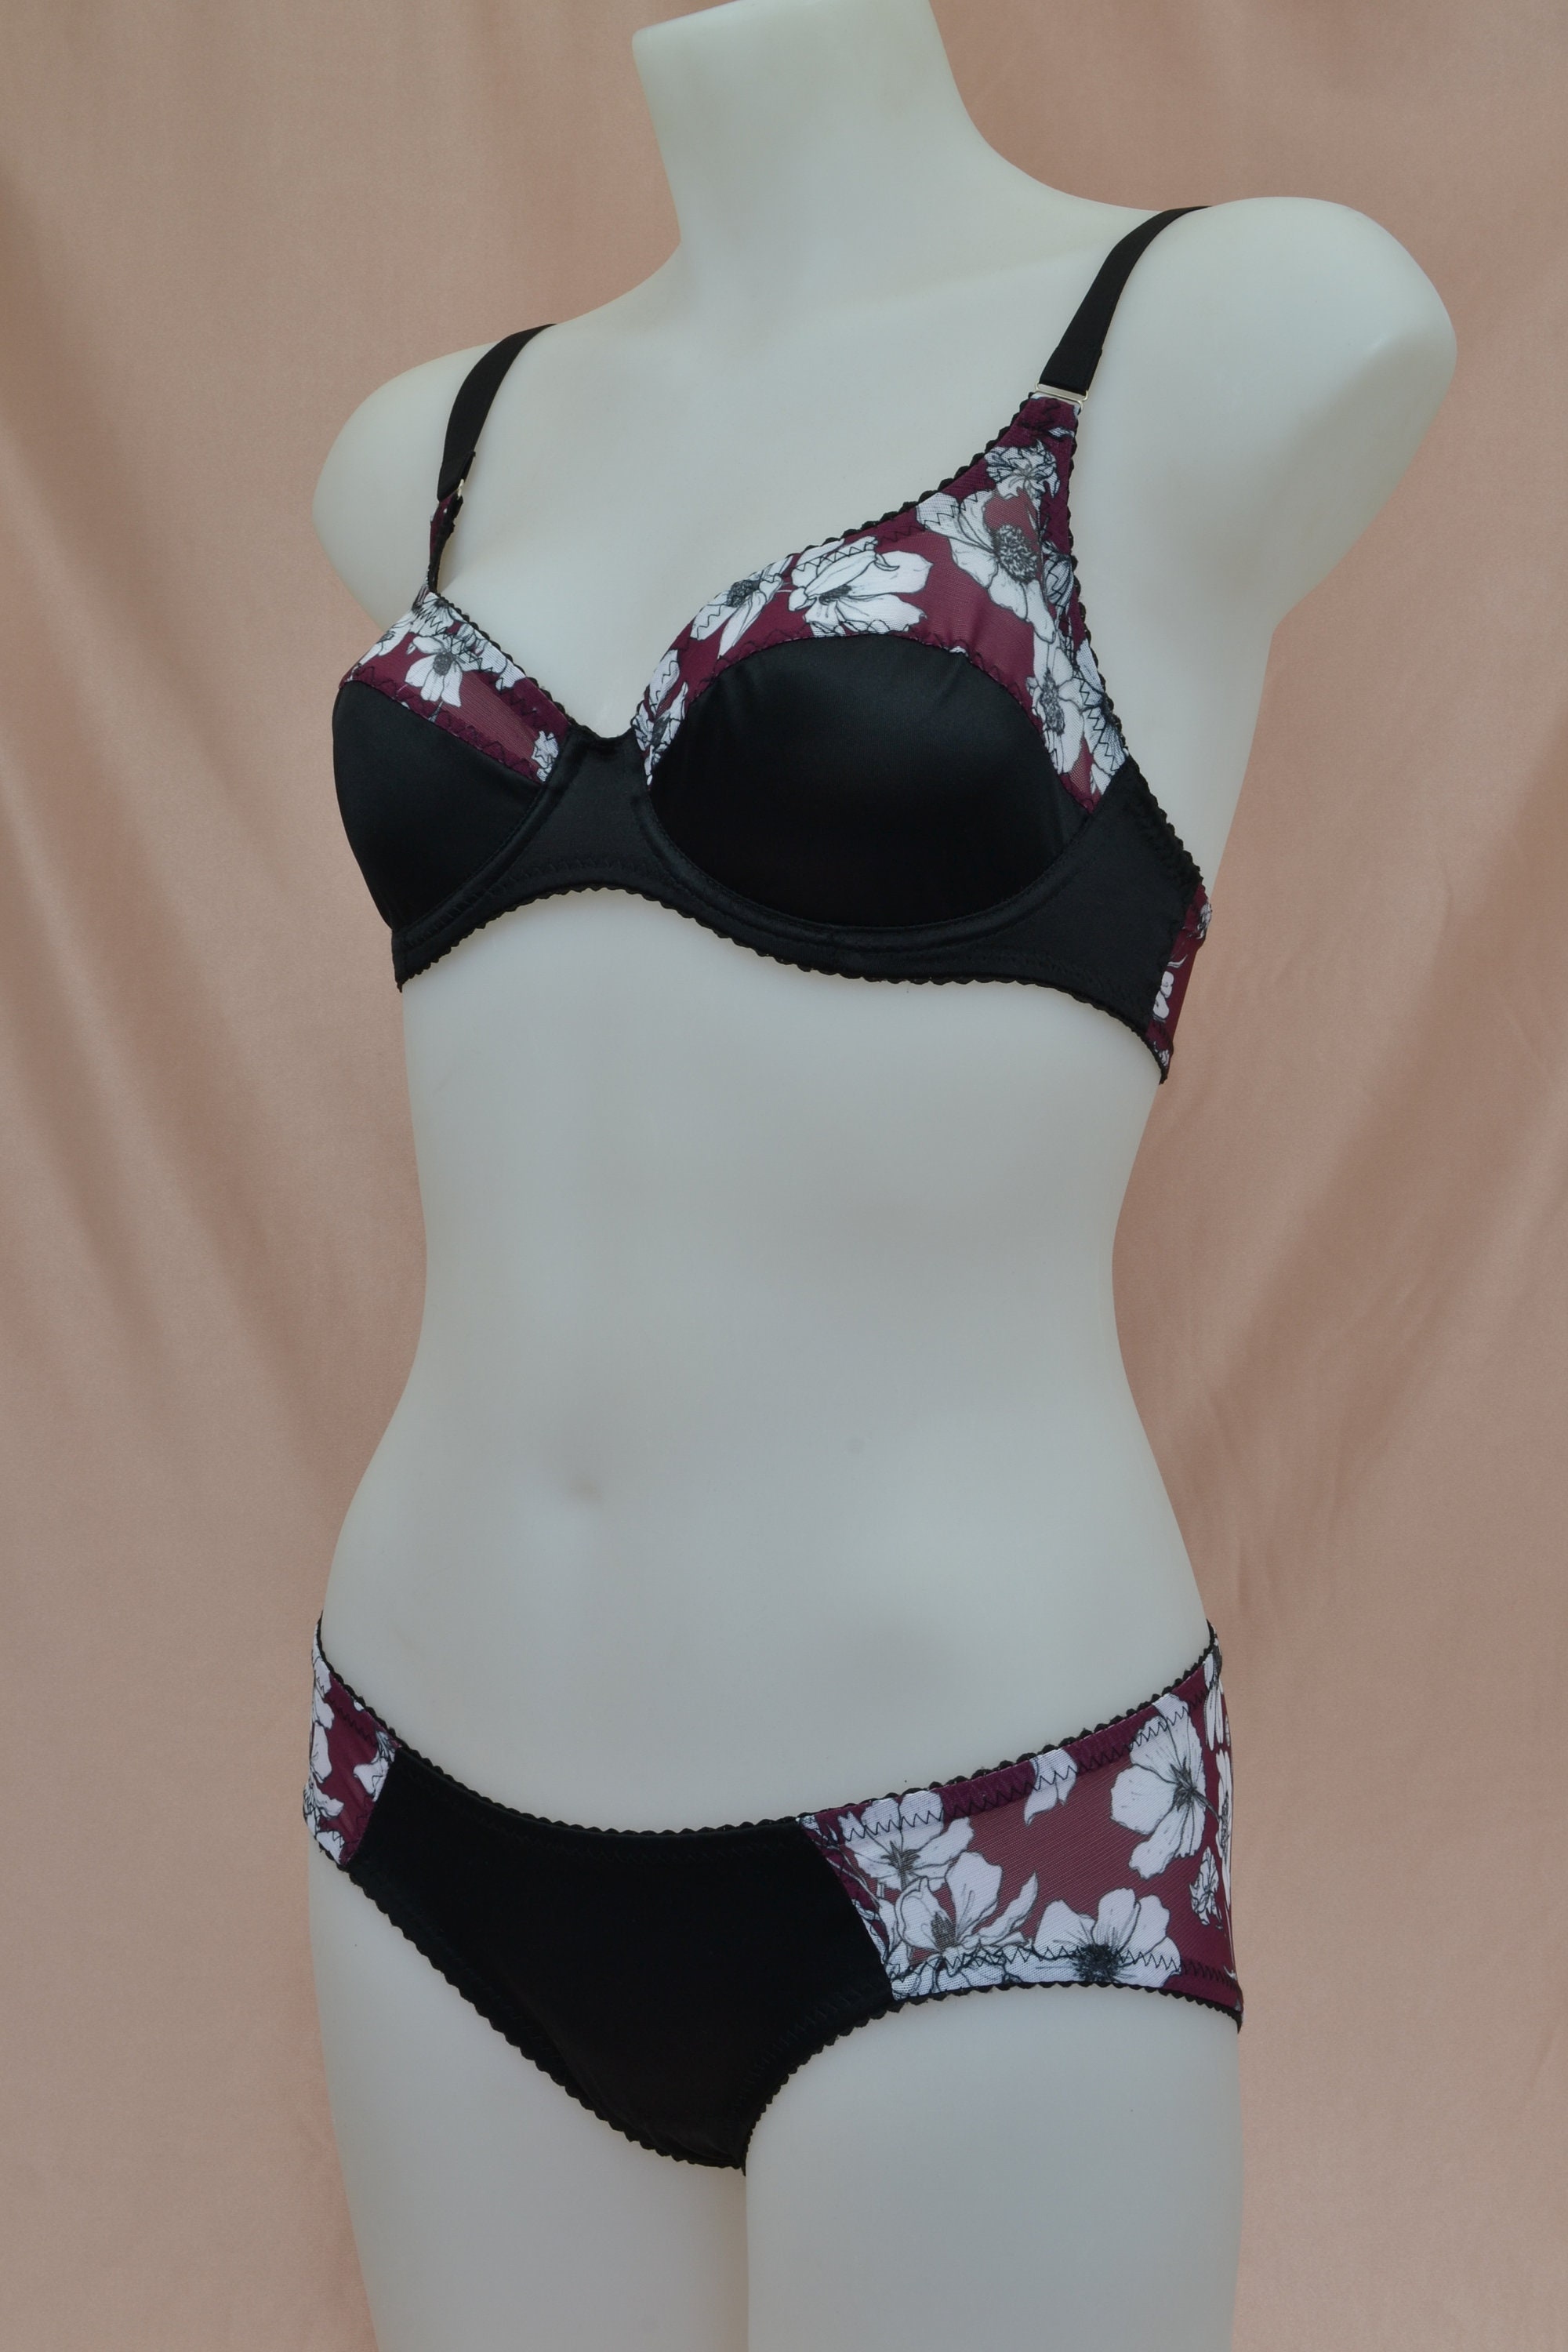 Black Cherry Underwired Balconette Bra in Vintage 1950s Retro Inspired  Lingerie Available in Plus Size -  Canada